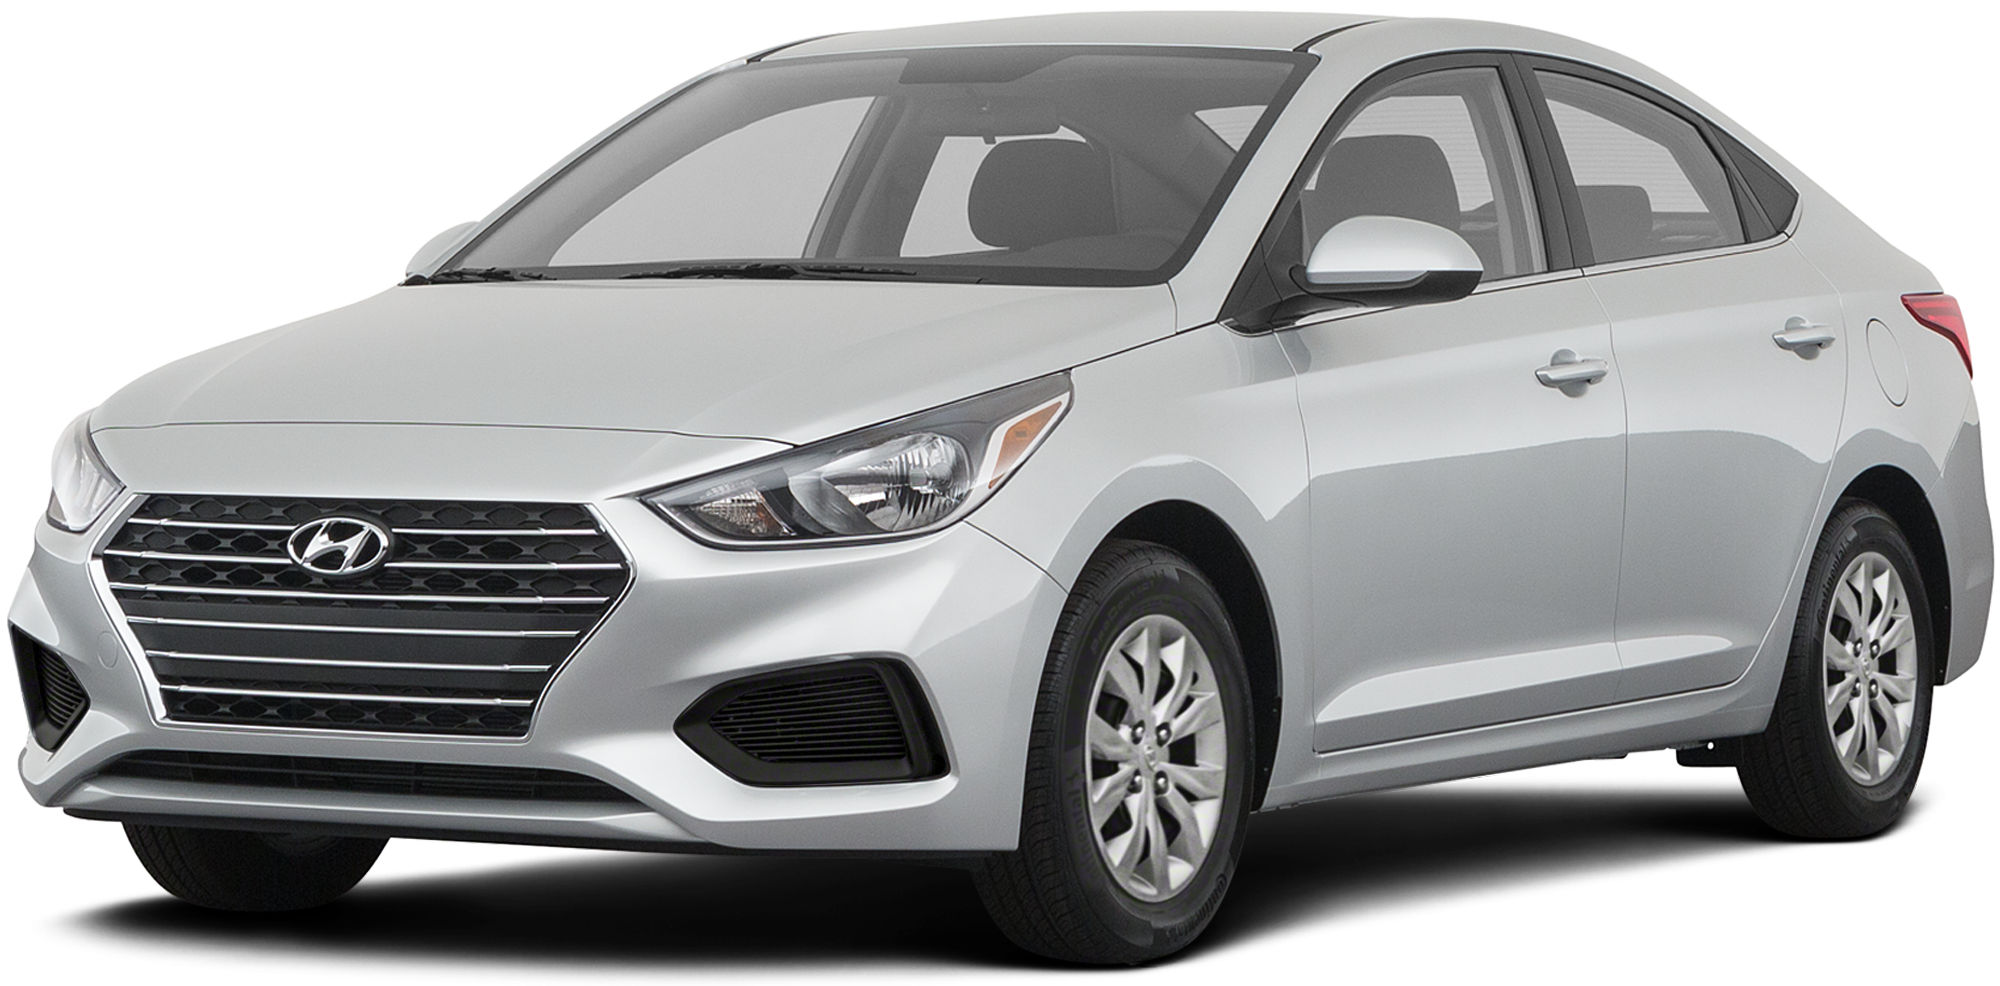 2019-hyundai-accent-incentives-specials-offers-in-centennial-co